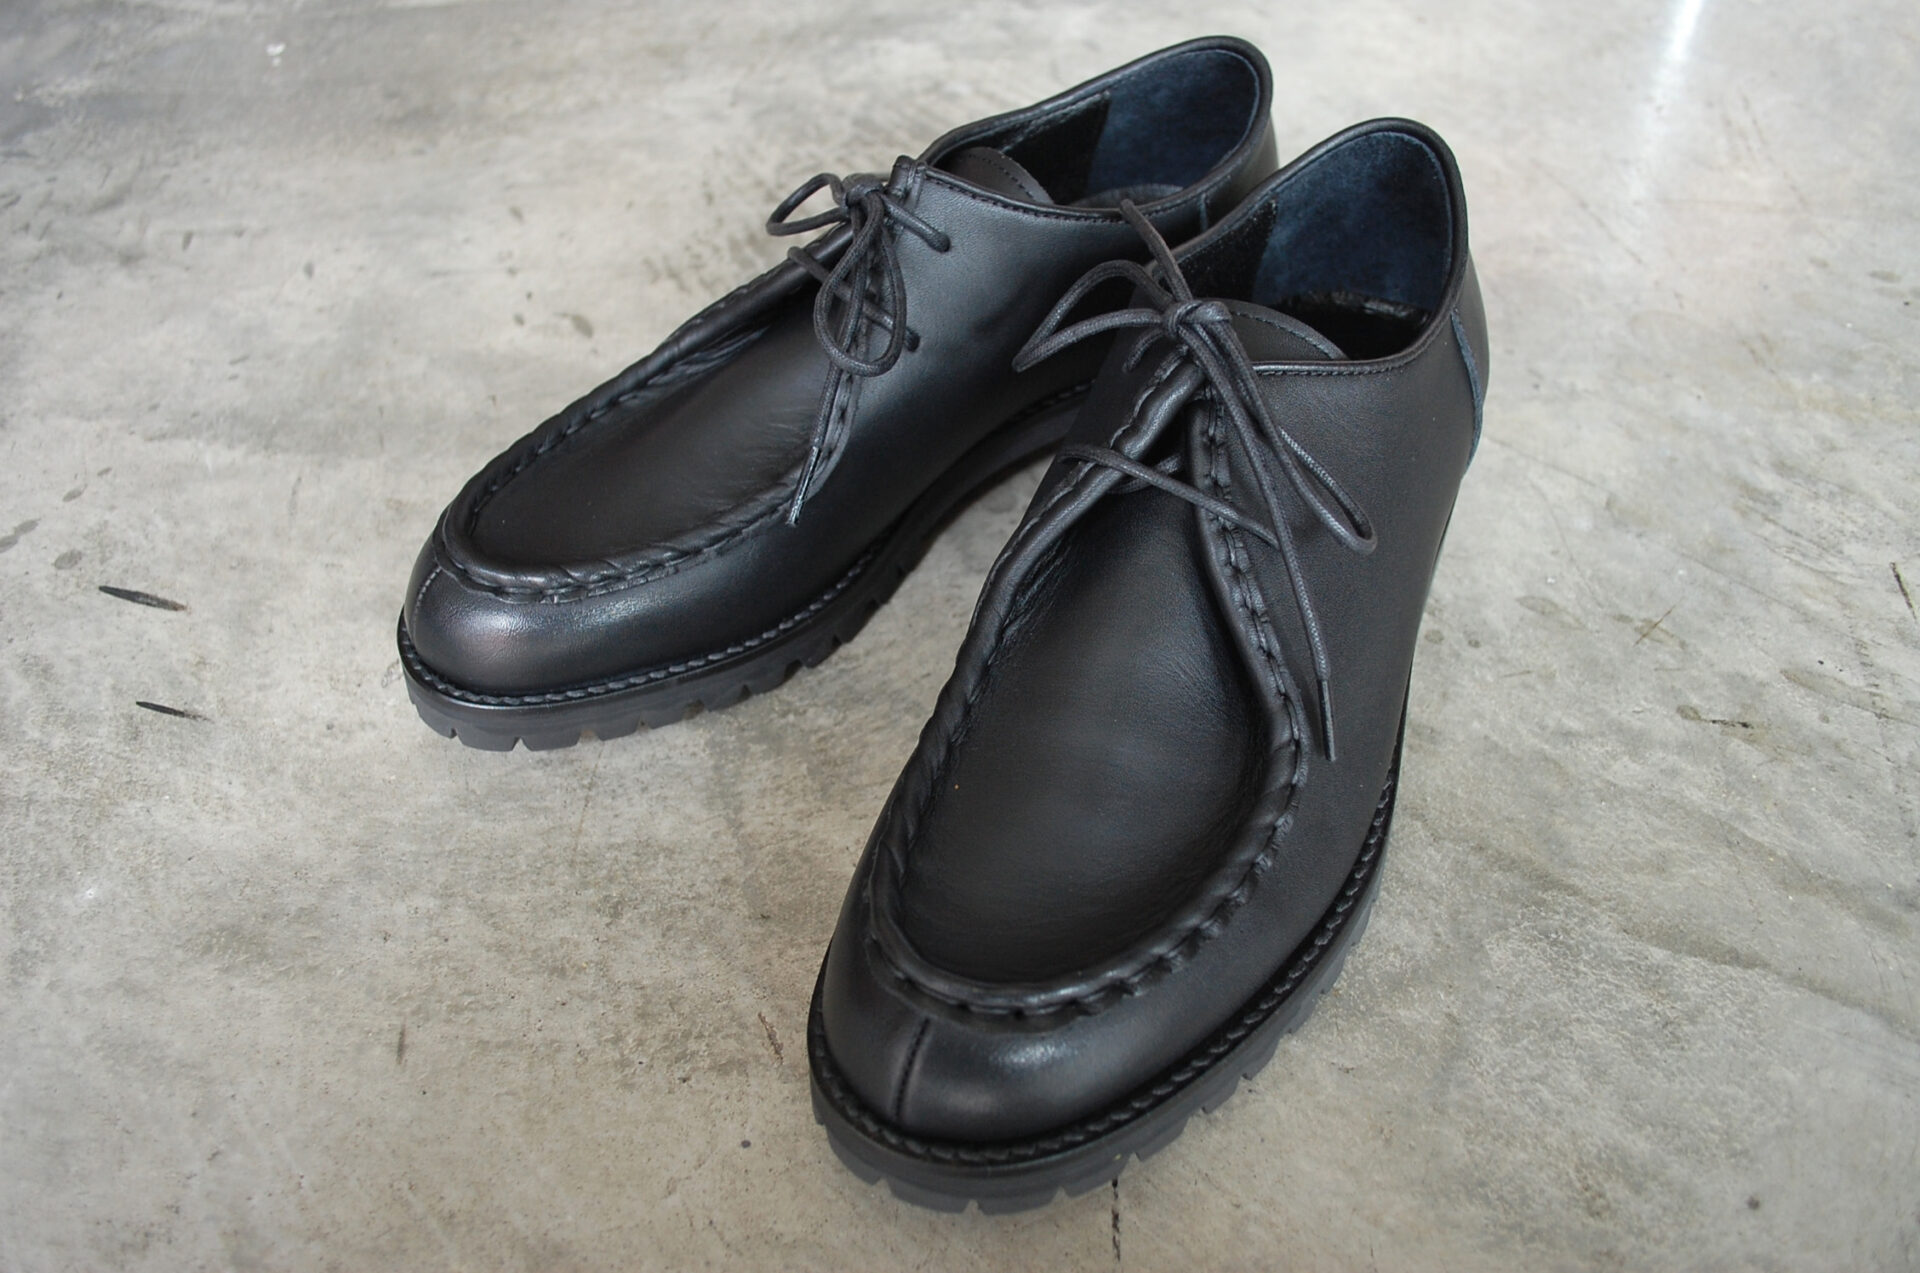 PADRONE パドローネ PU8759-2401-21C TYROLEAN SHOES (WATER PROOF